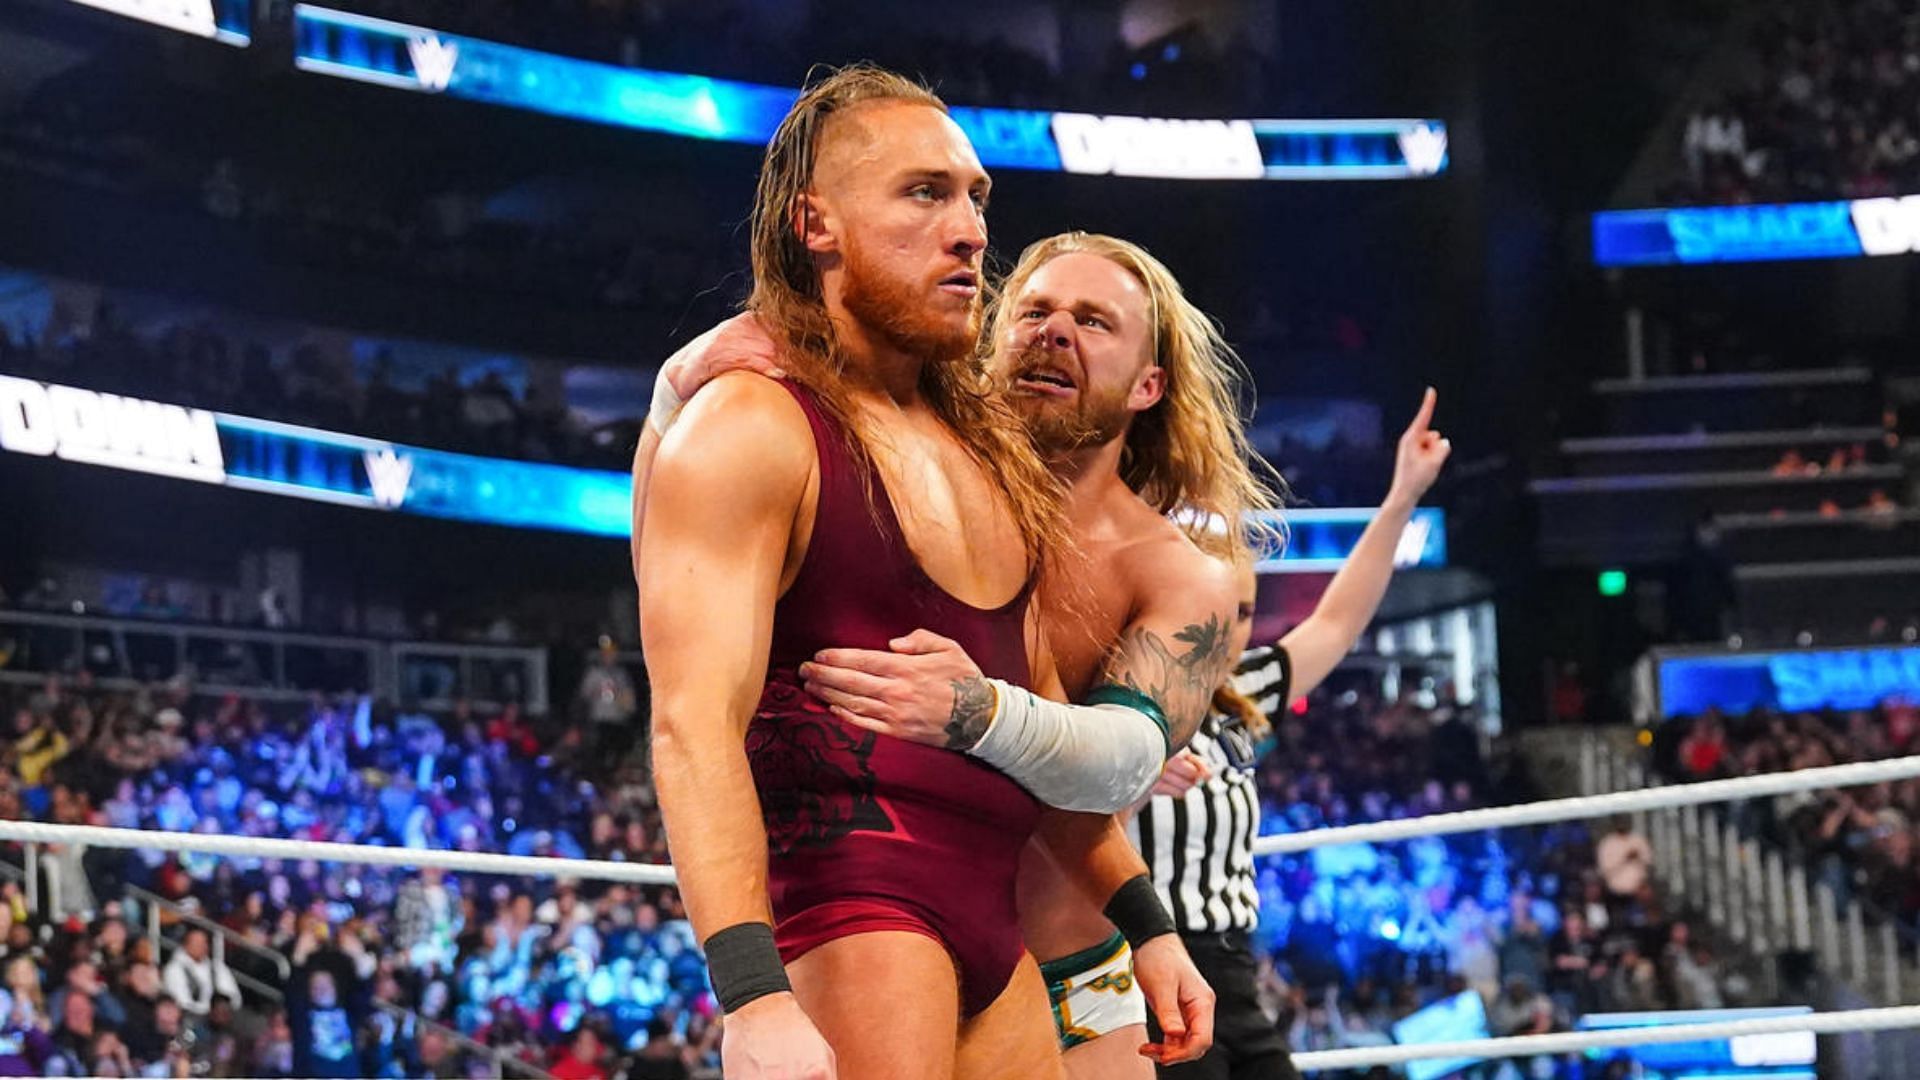 Butch recently went back as Pete Dunne on SmackDown!